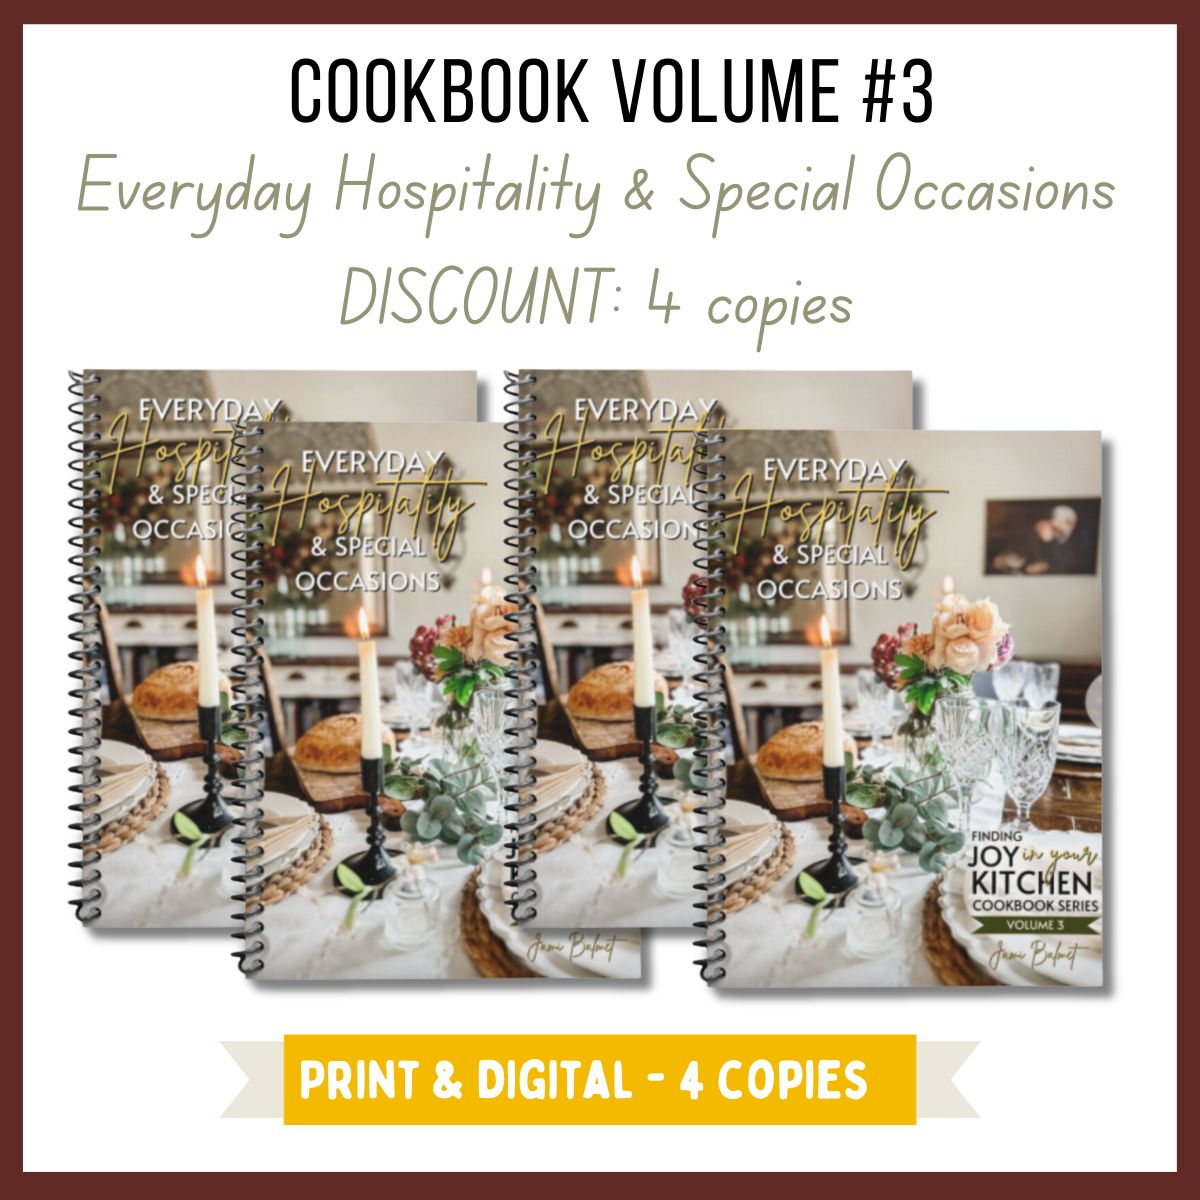 4 book bundle: Cookbook Volume 3: Everyday Hospitality & Special Occasions - PRINT